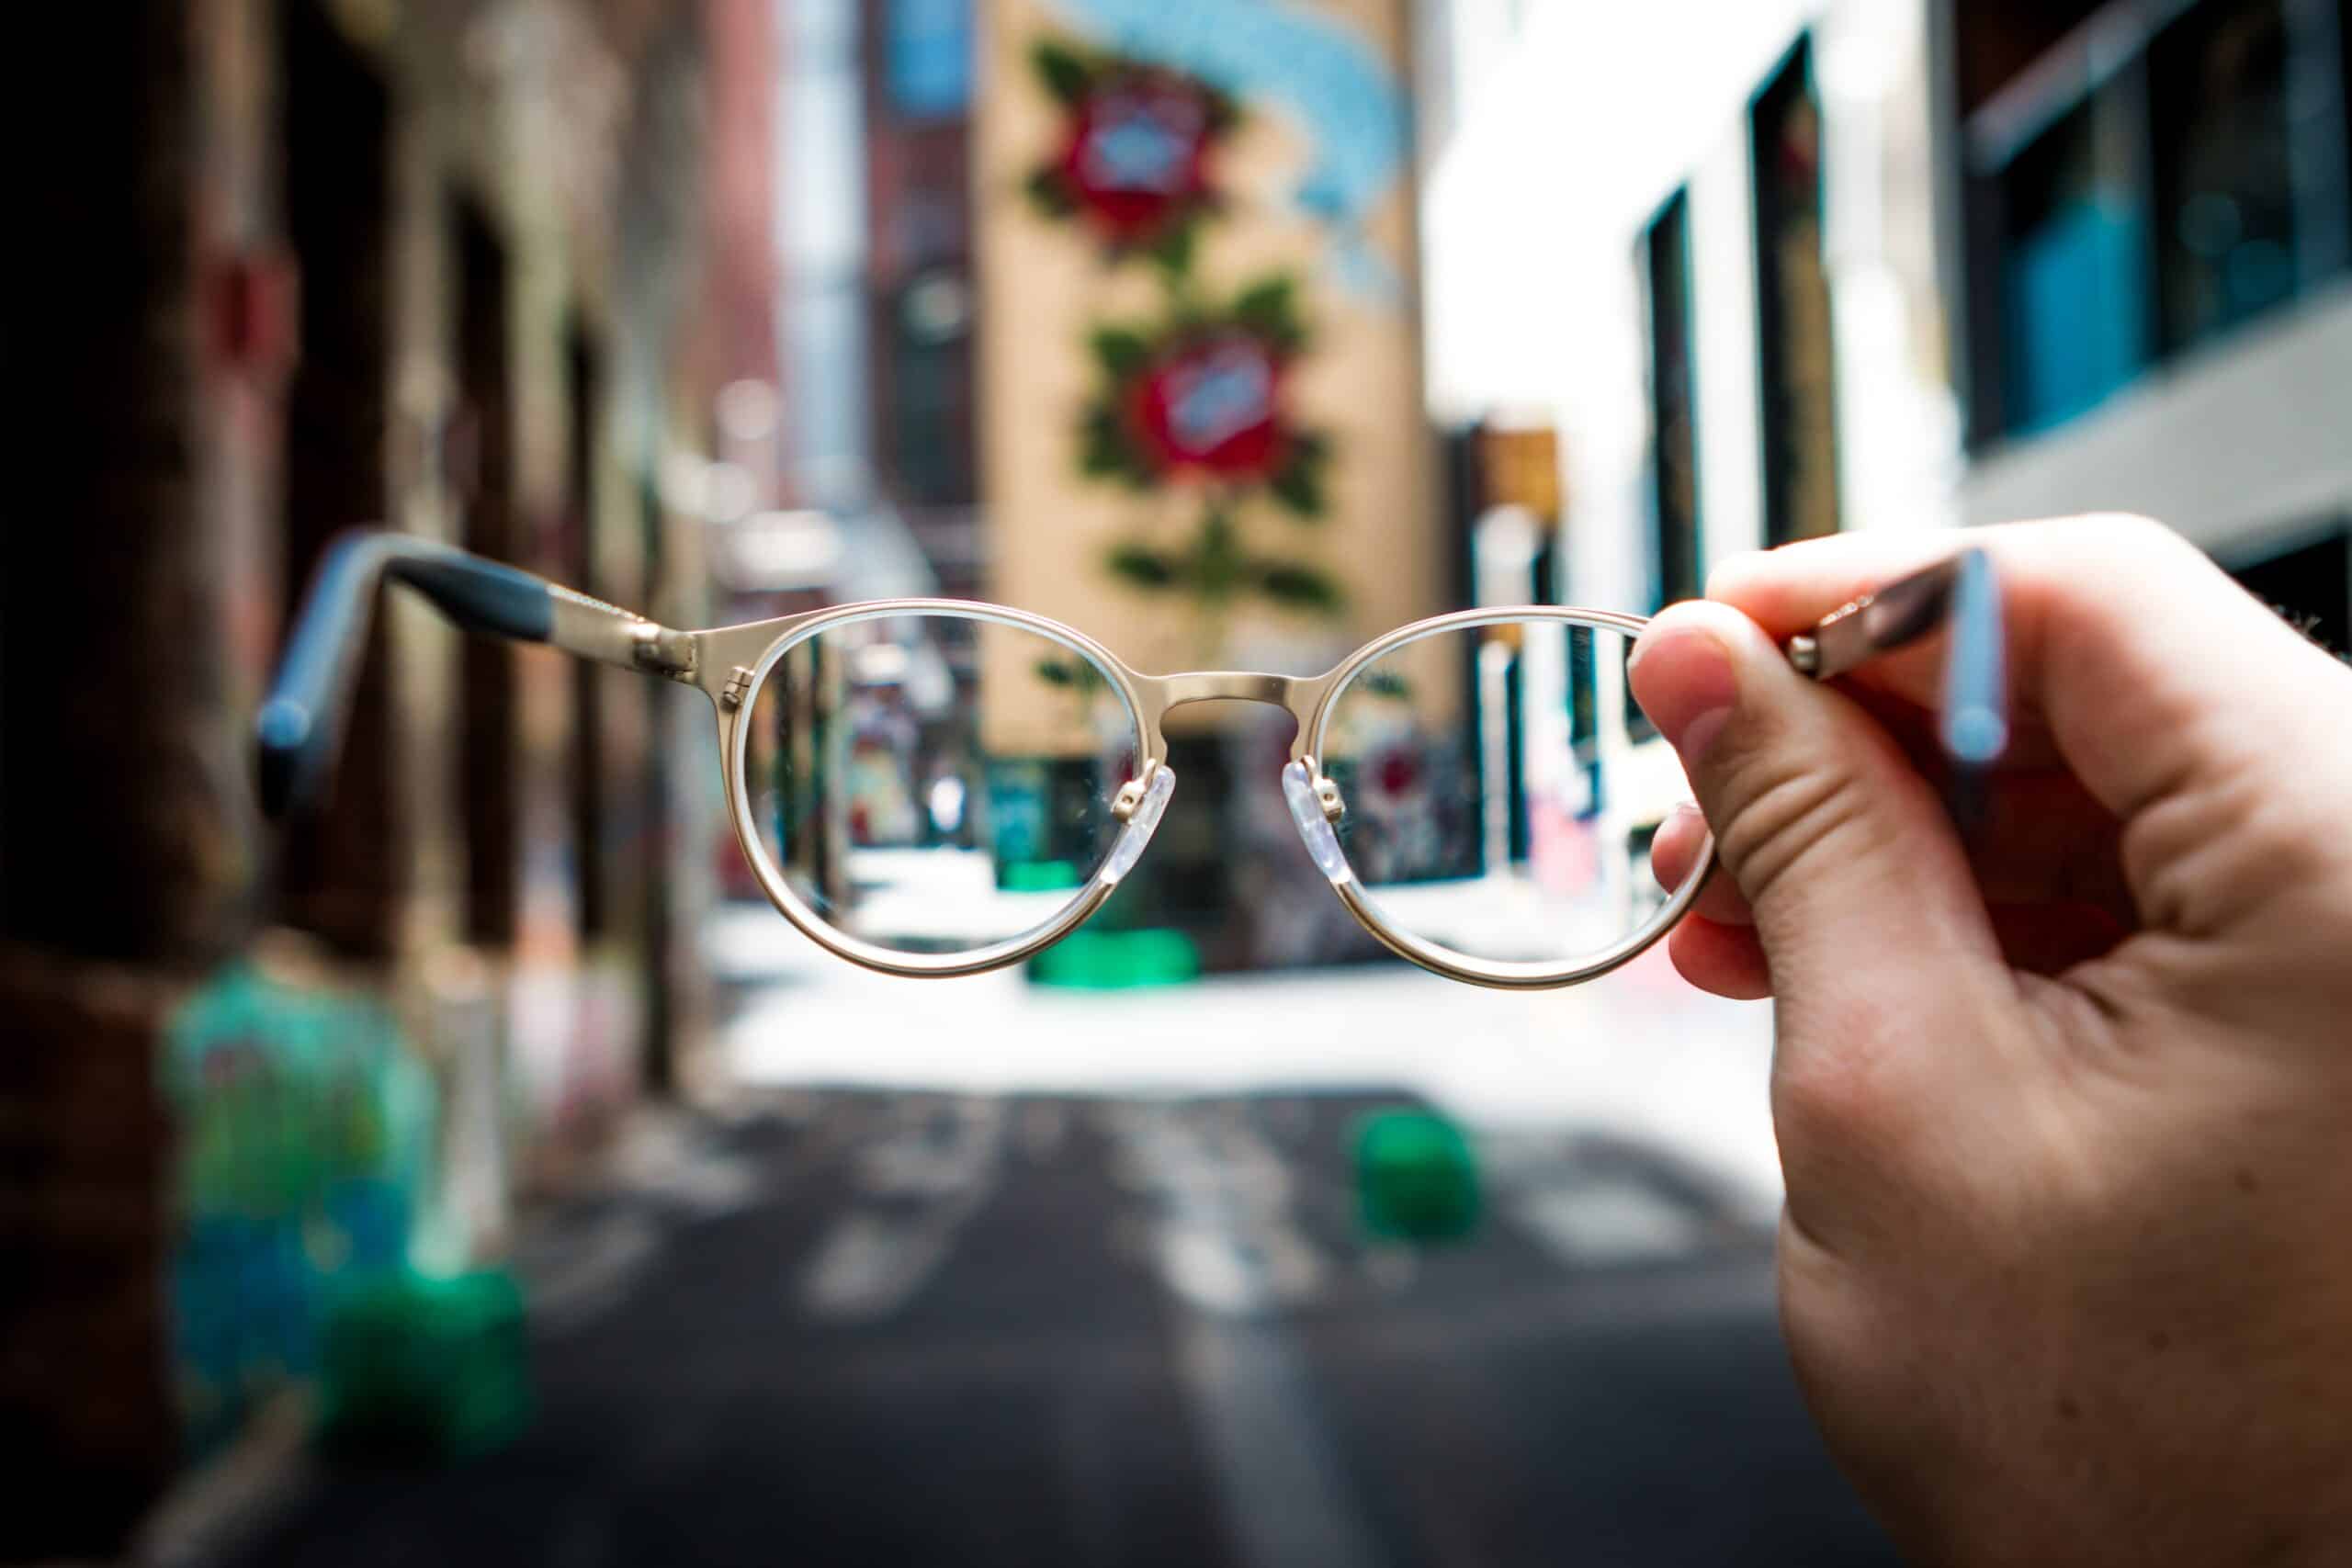 What You Should Know About Your Eyeglass Prescription